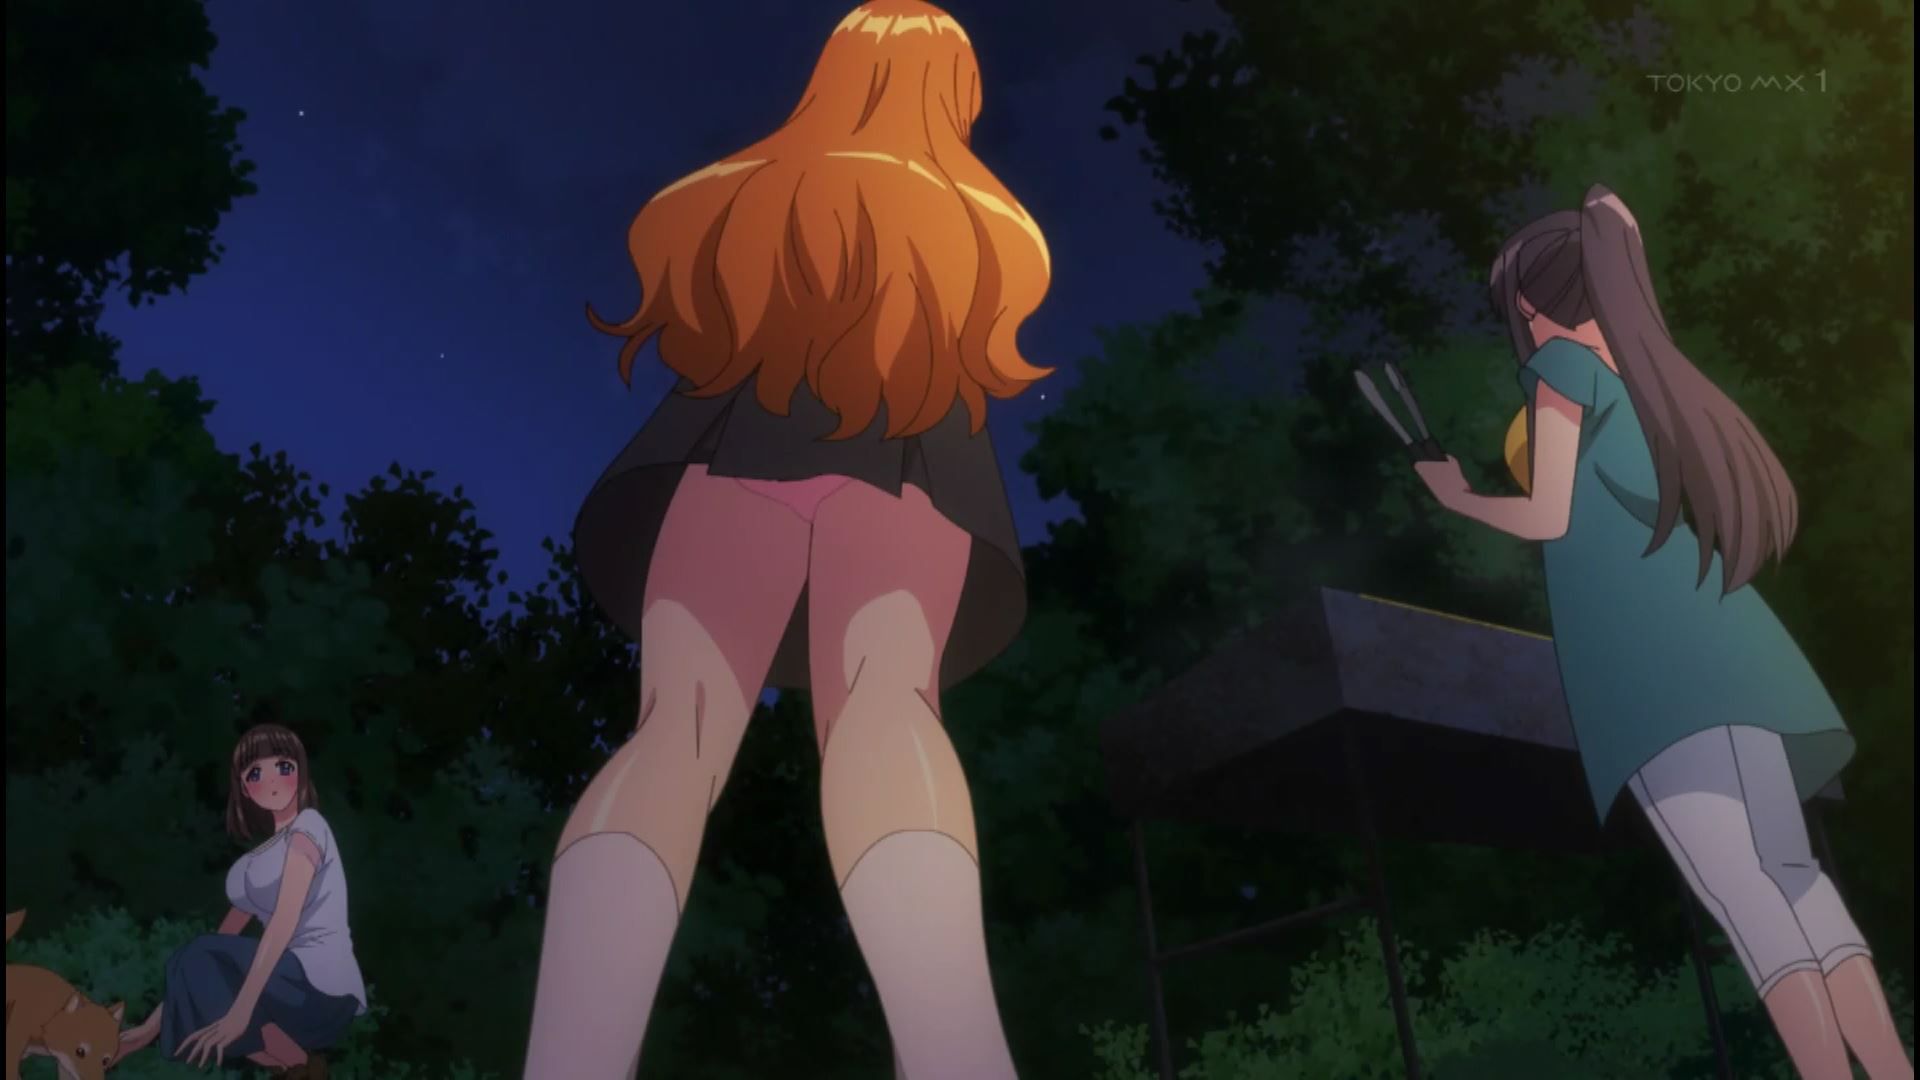 outdoors in episode 7 of the anime "Harem Kyampu!" And go straight to the ecchi scene! 2